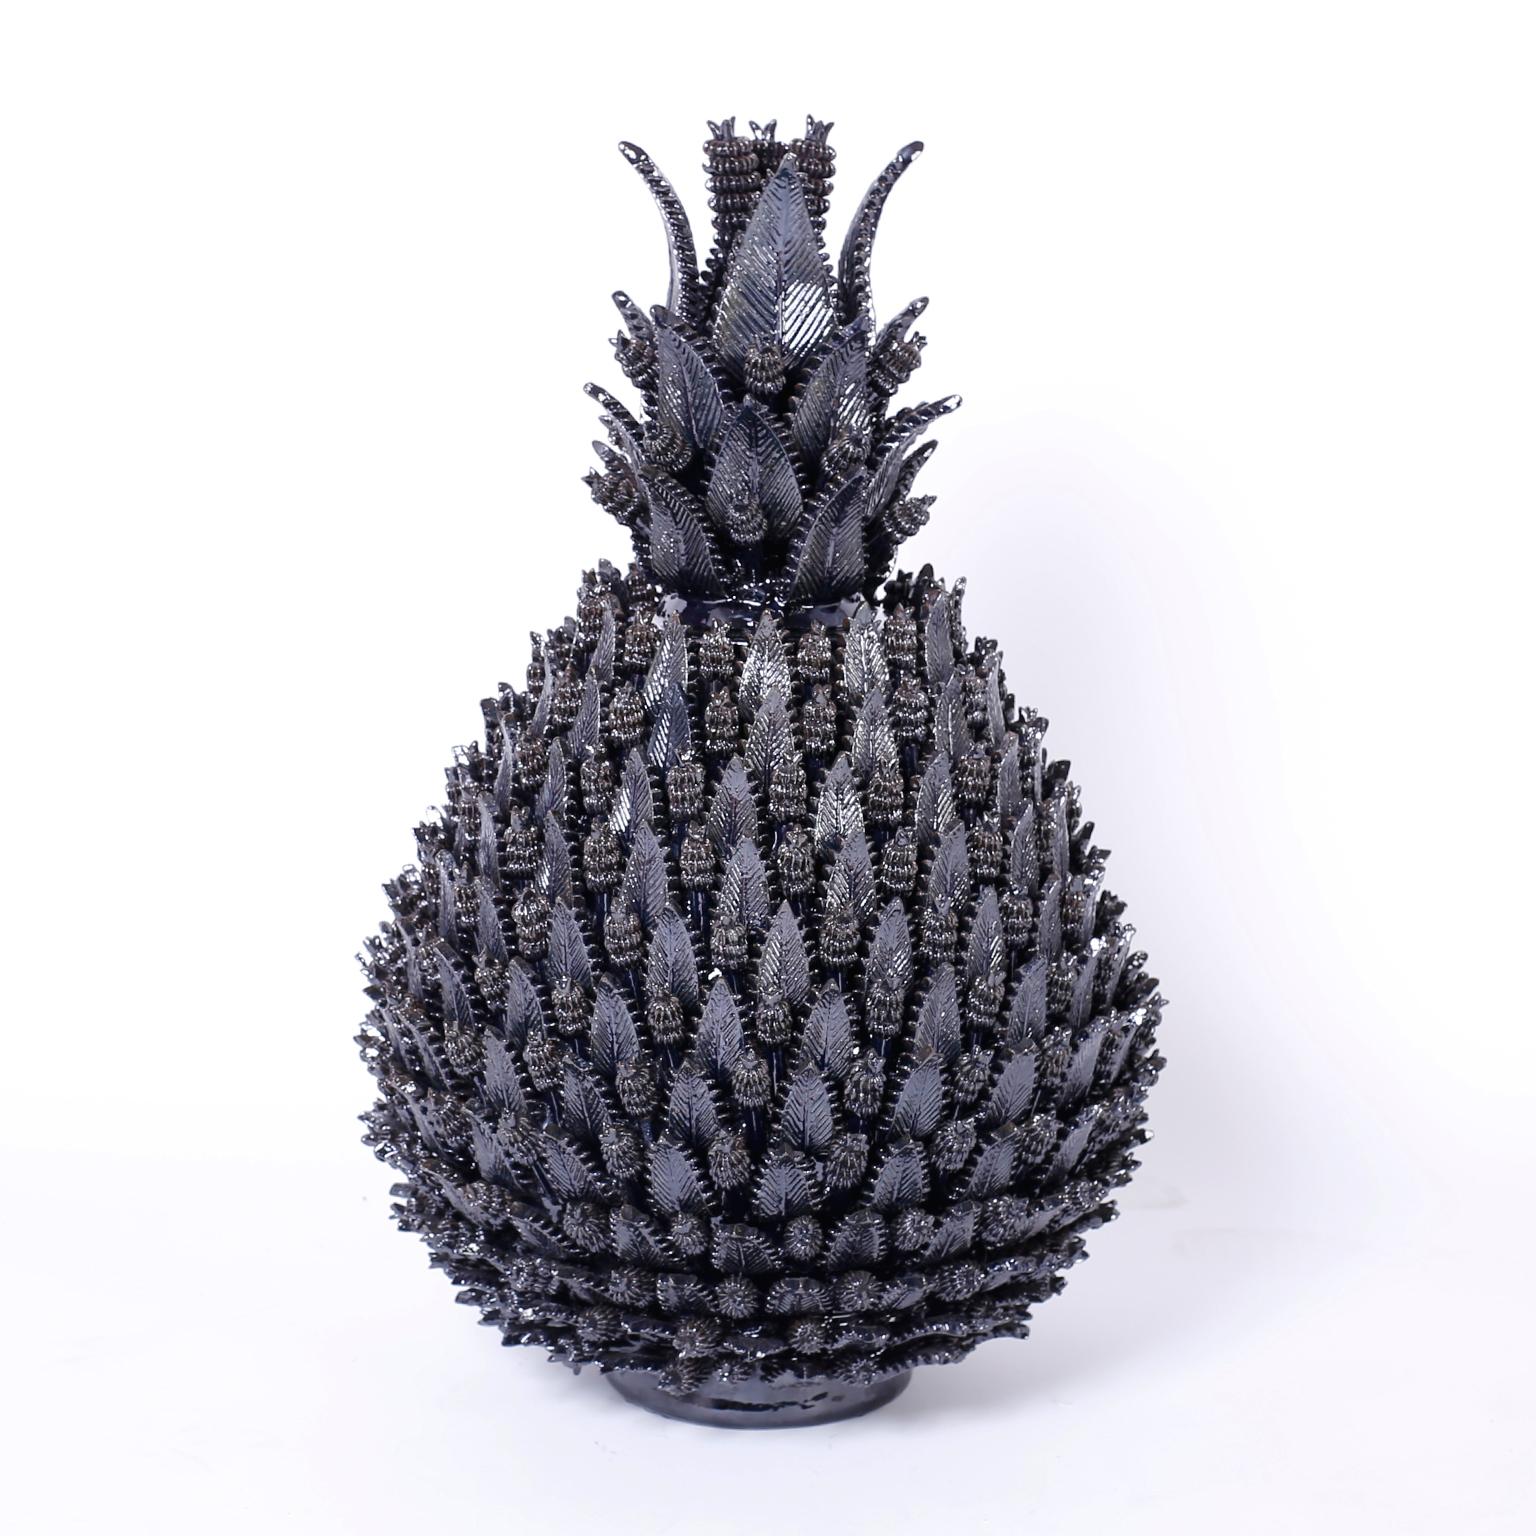 A striking display of pottery prowess with an ambitious composition of leaves and cones forming stylized lidded pineapples covered in a deep inky blue glaze.